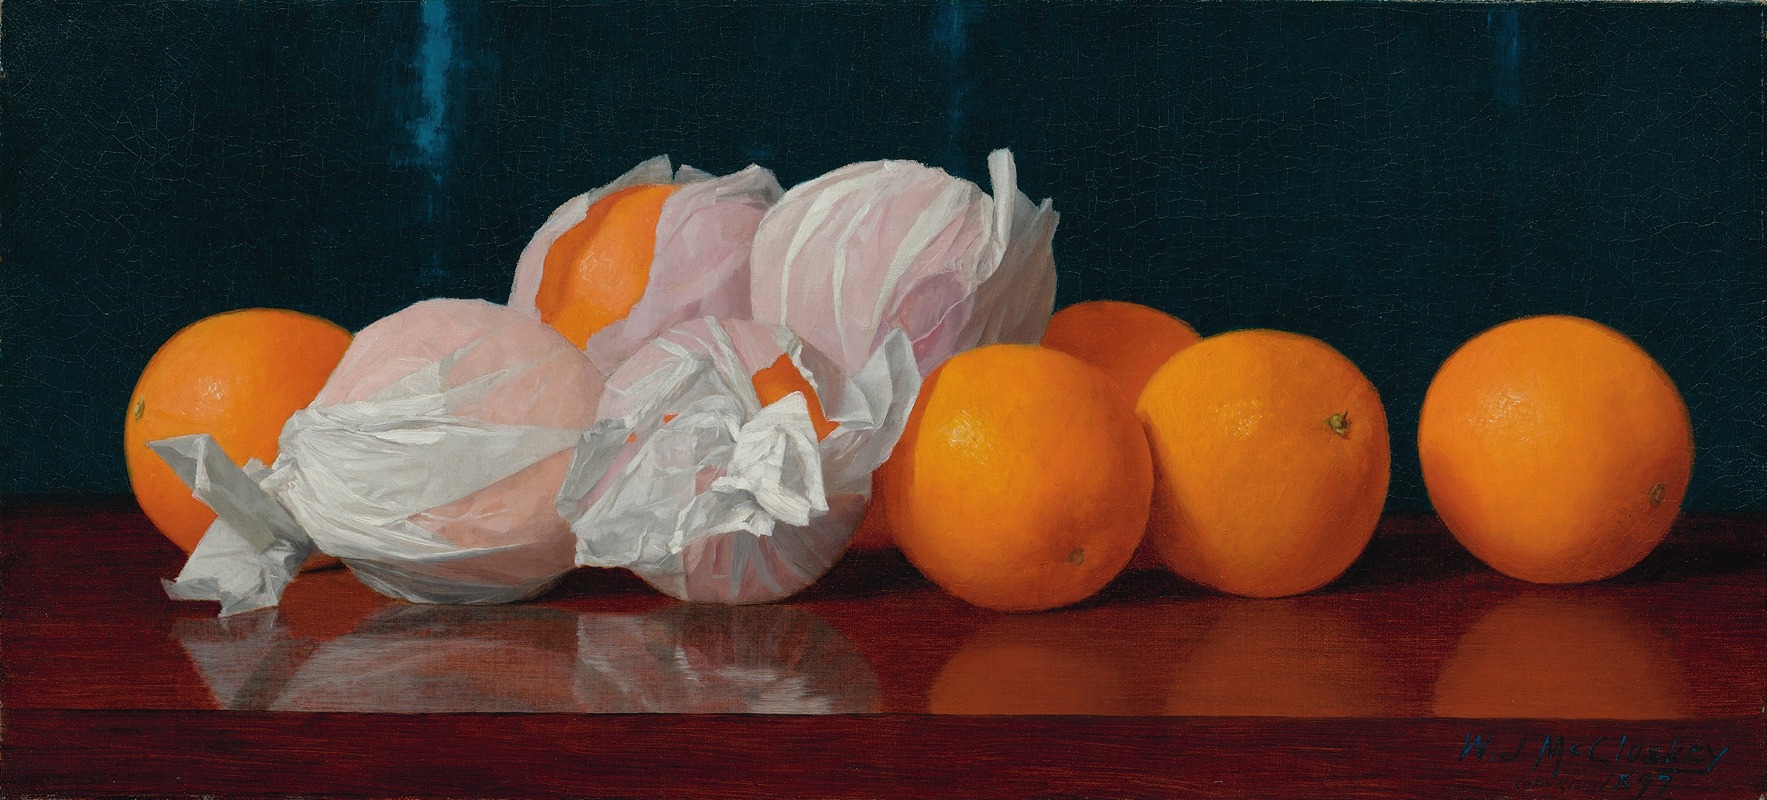 William Mccloskey - Wrapped Oranges On A Tabletop